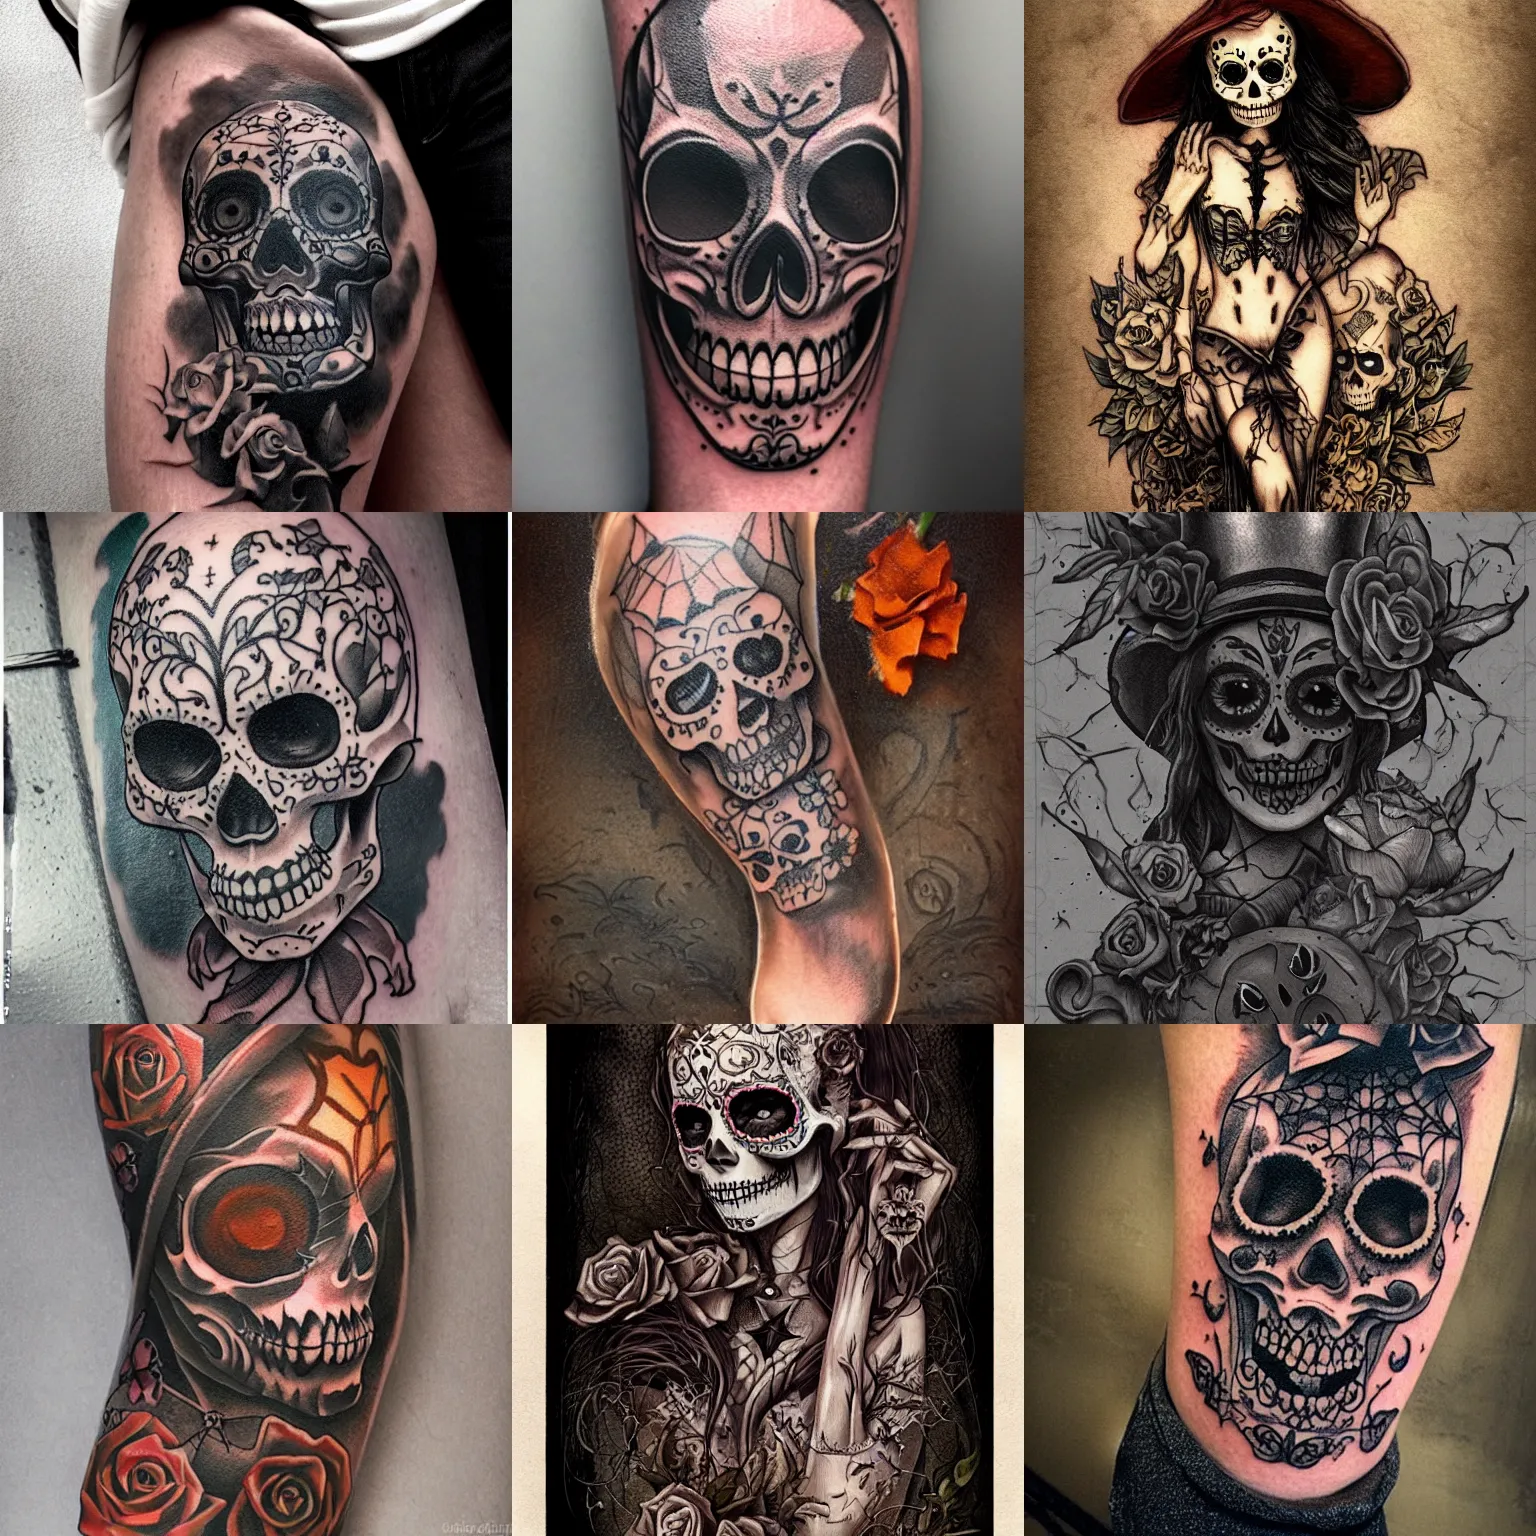 Bada Halloween  horror tattoos that are bloody awesome 34 Photos